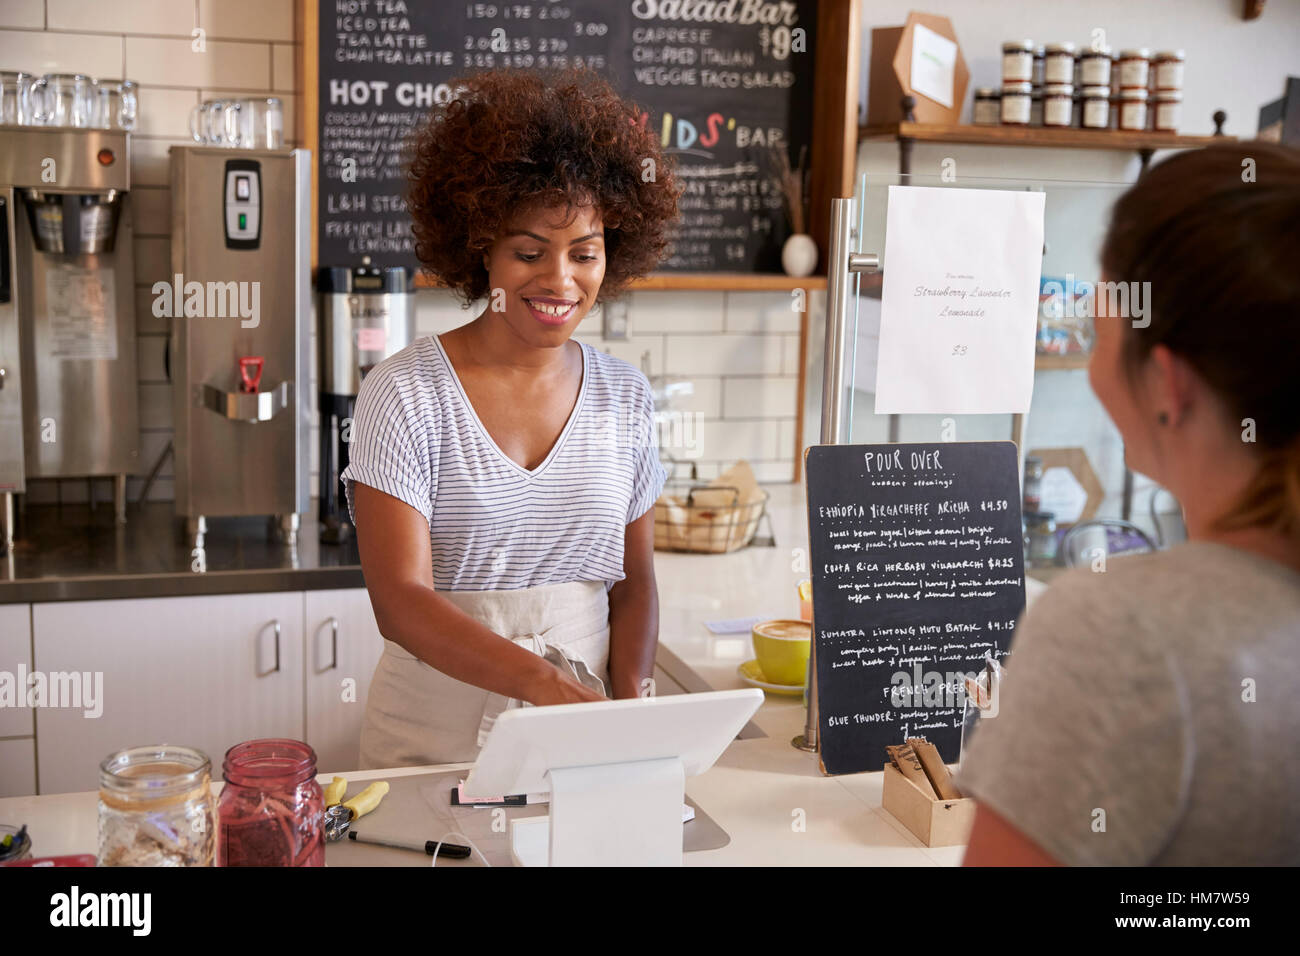 Waitress taking a customer’s order at till in a coffee shop Stock Photo